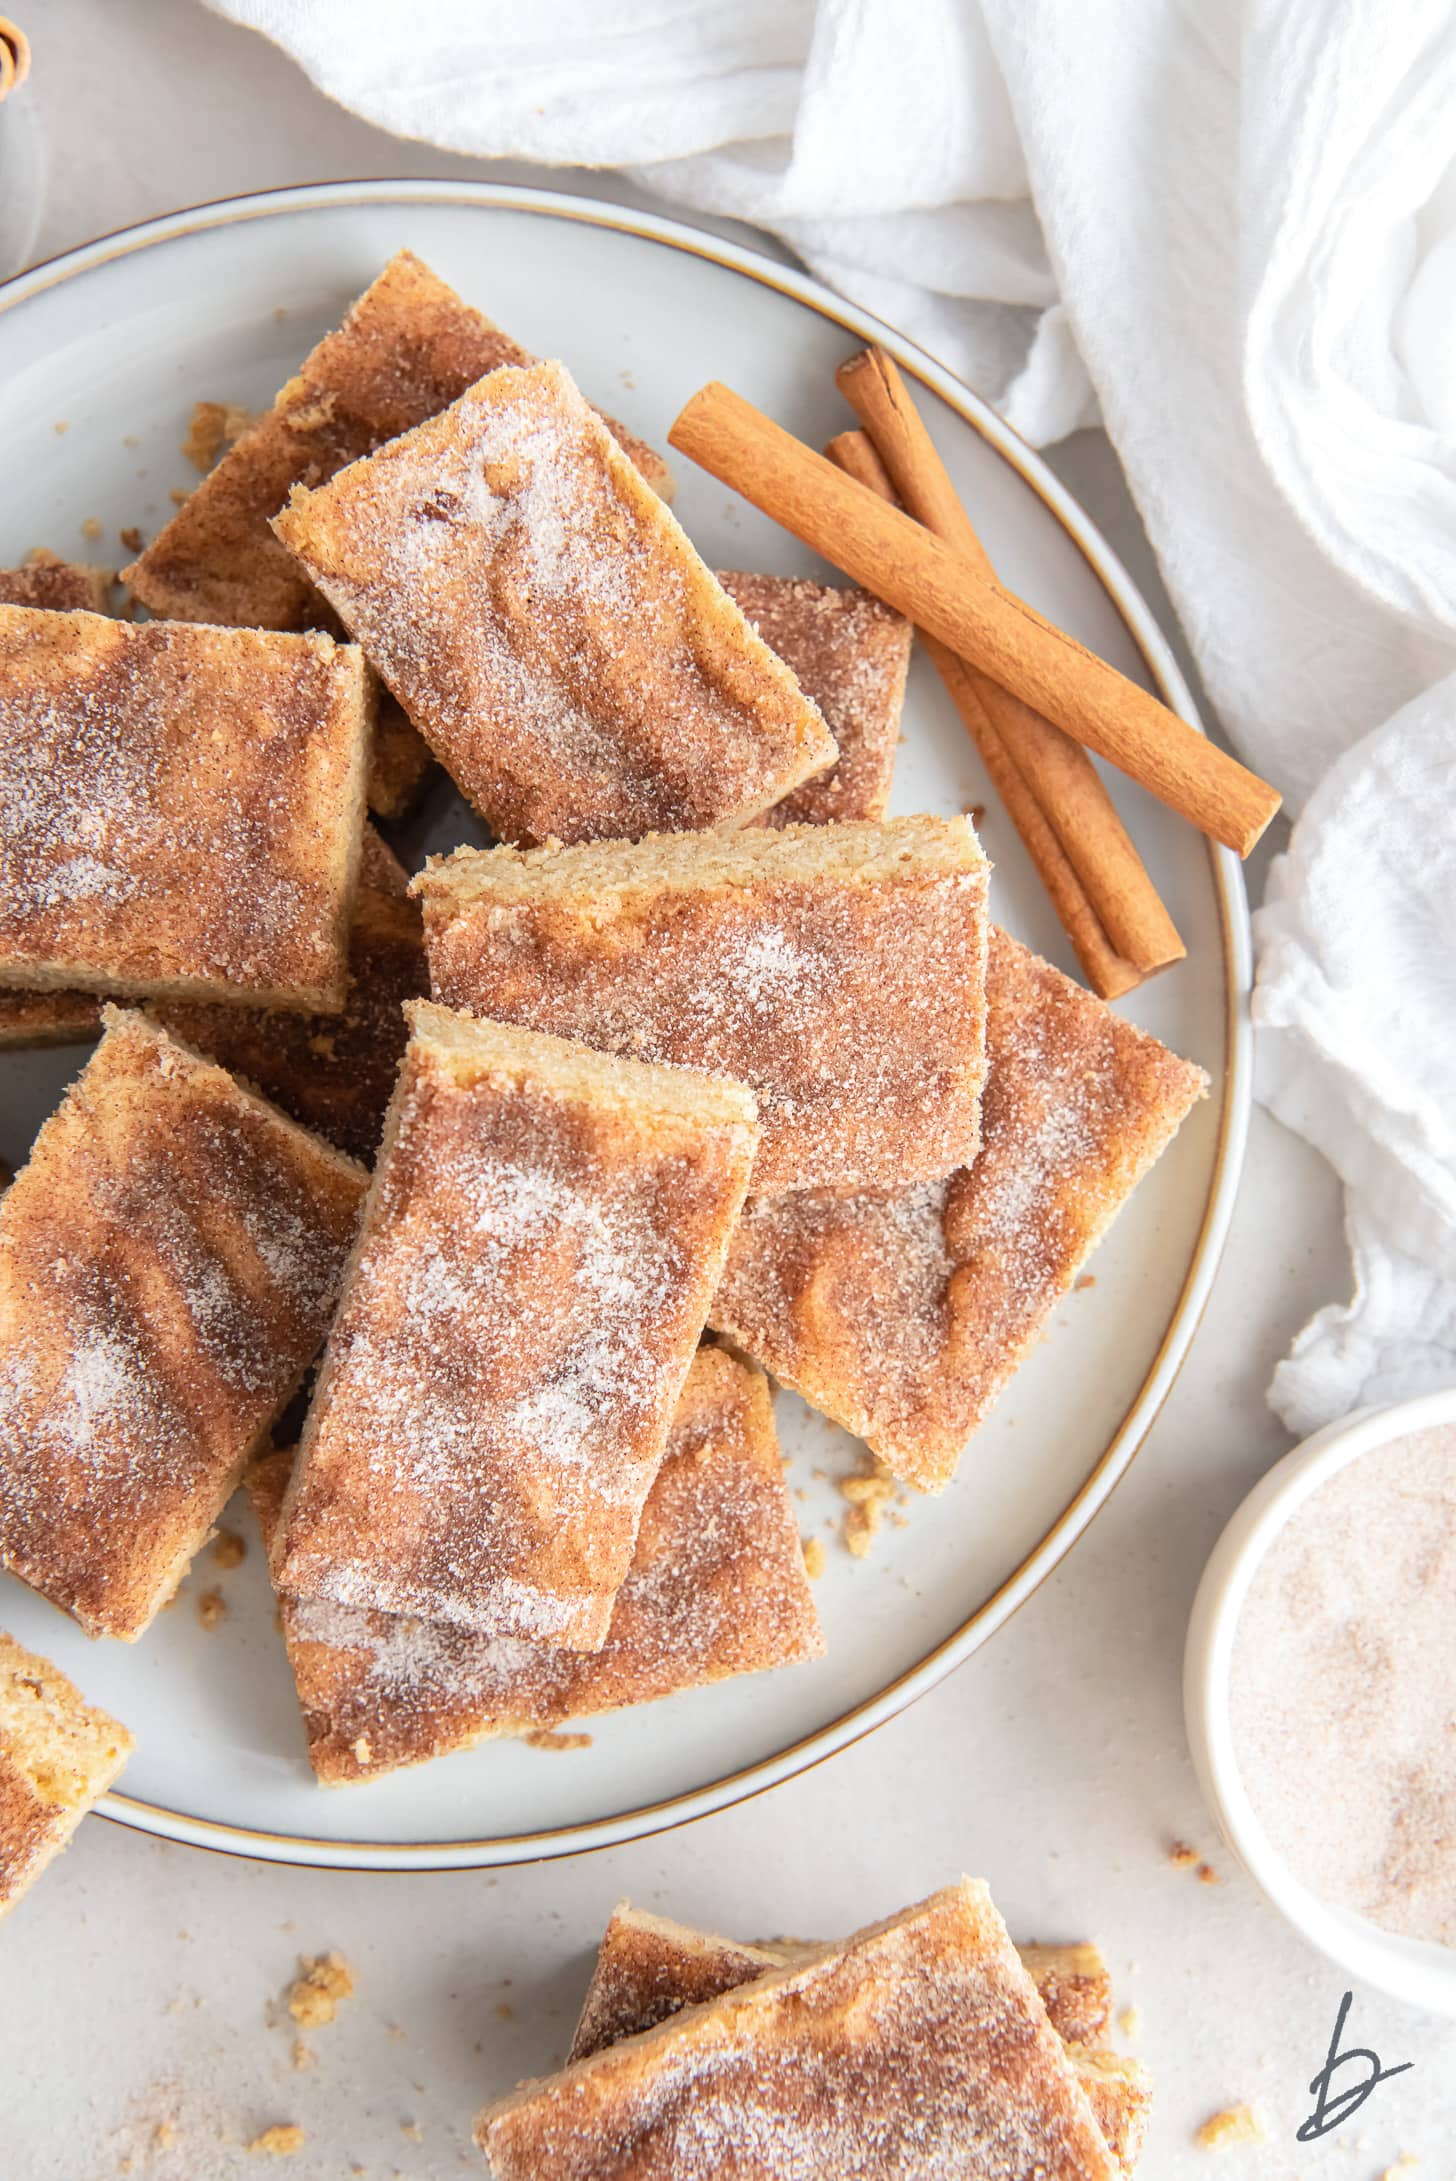 cinnamon sugar coated snickerdoodle bars on a round plate with cinnamon sticks